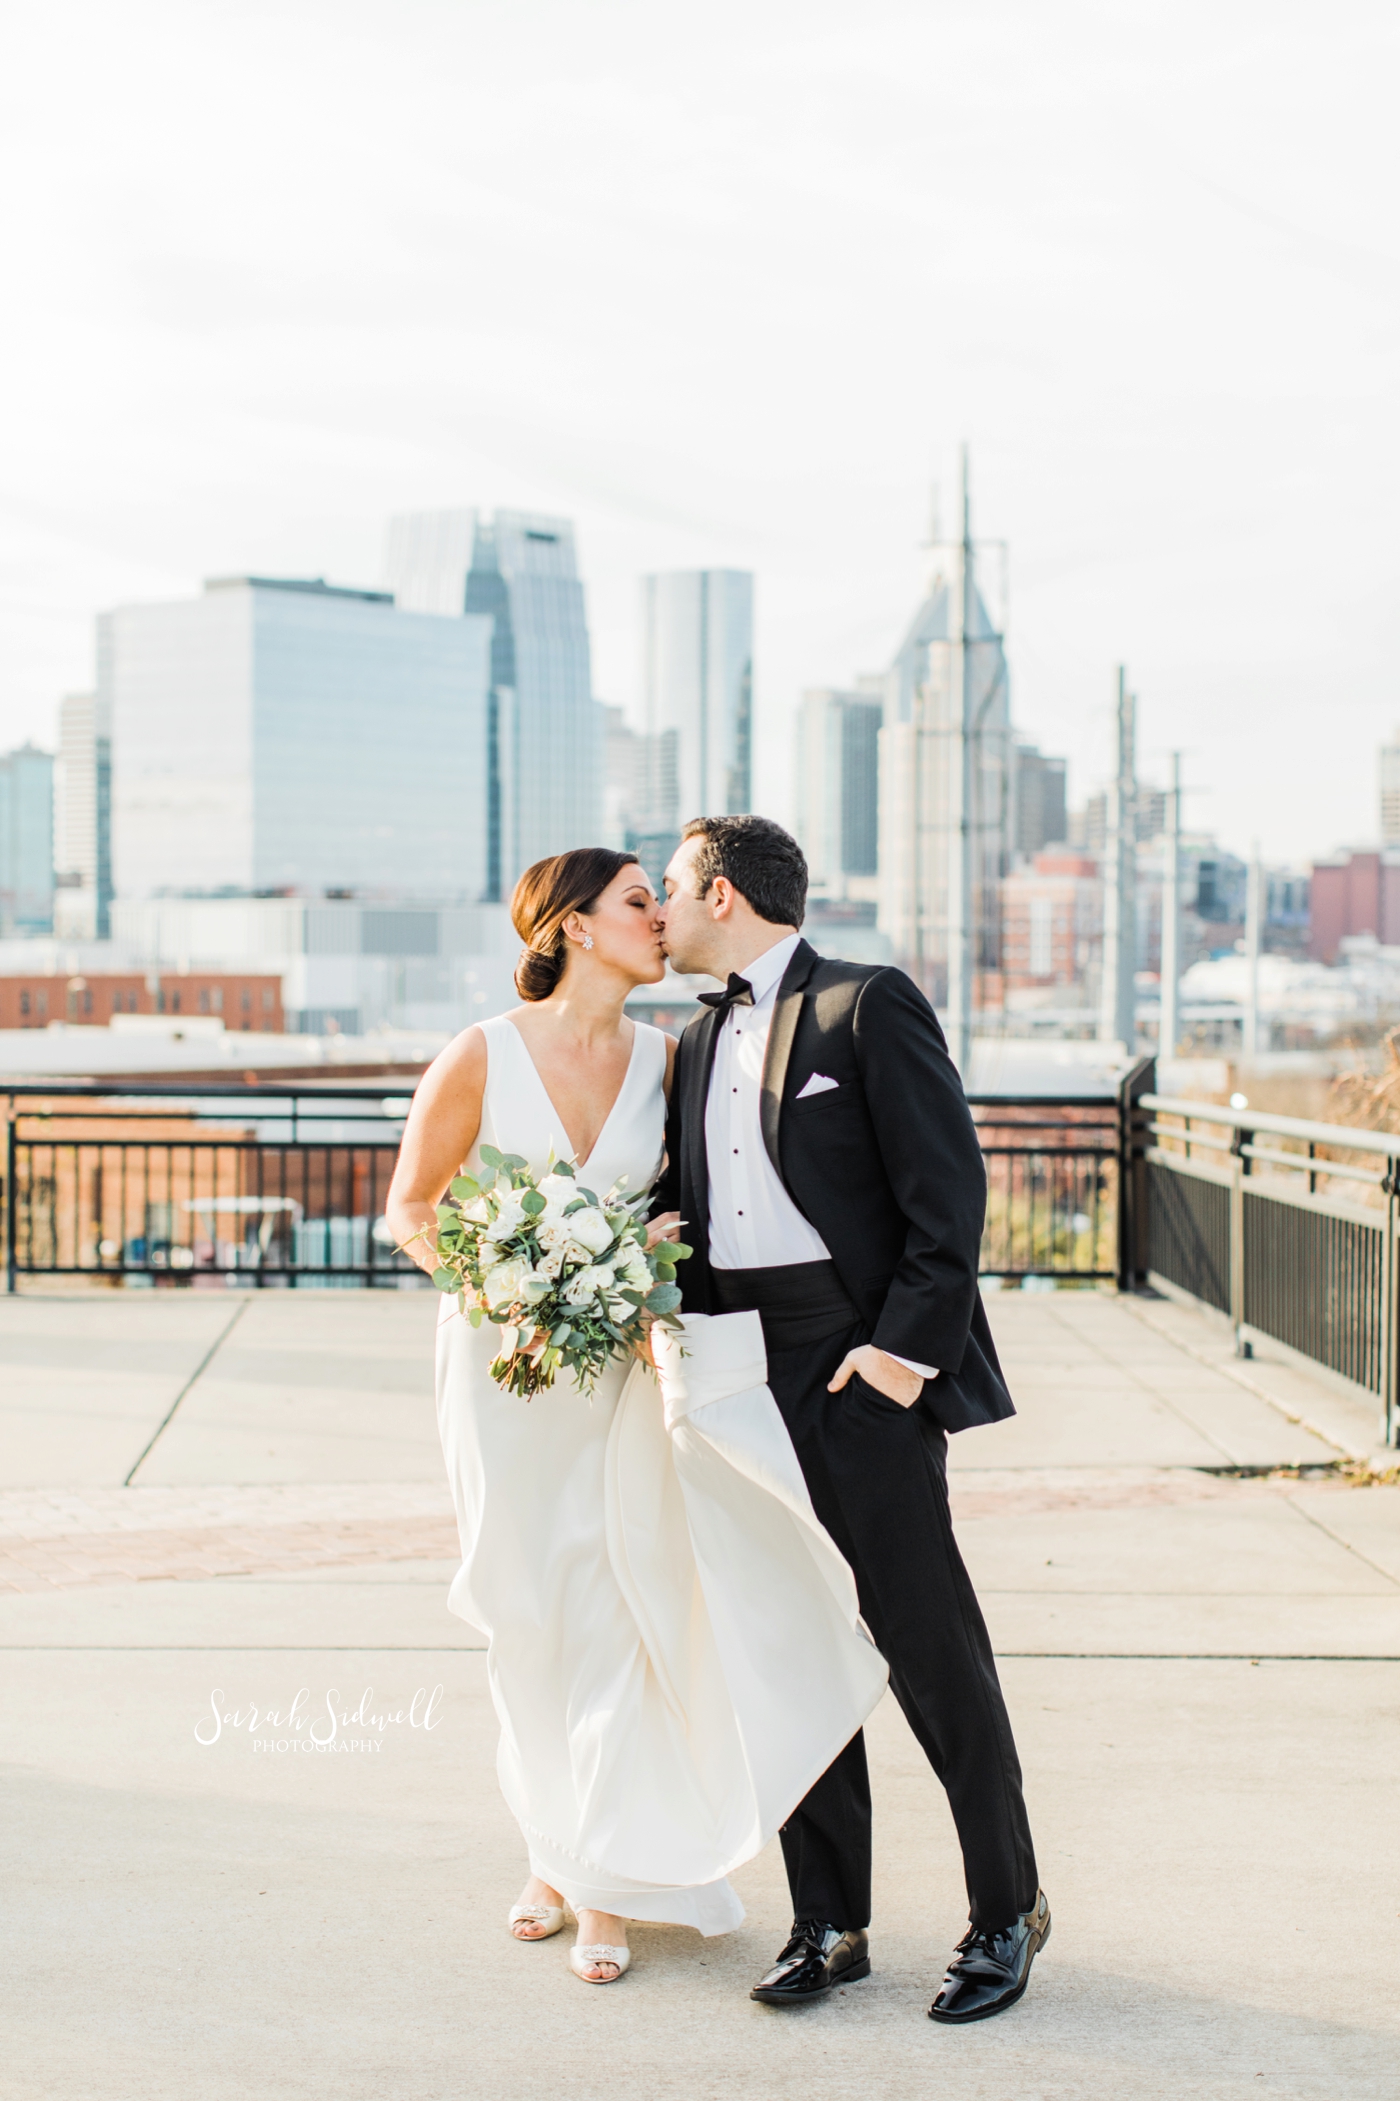 A man gives his bride a kiss | Sarah Sidwell Photography | The Bell Tower